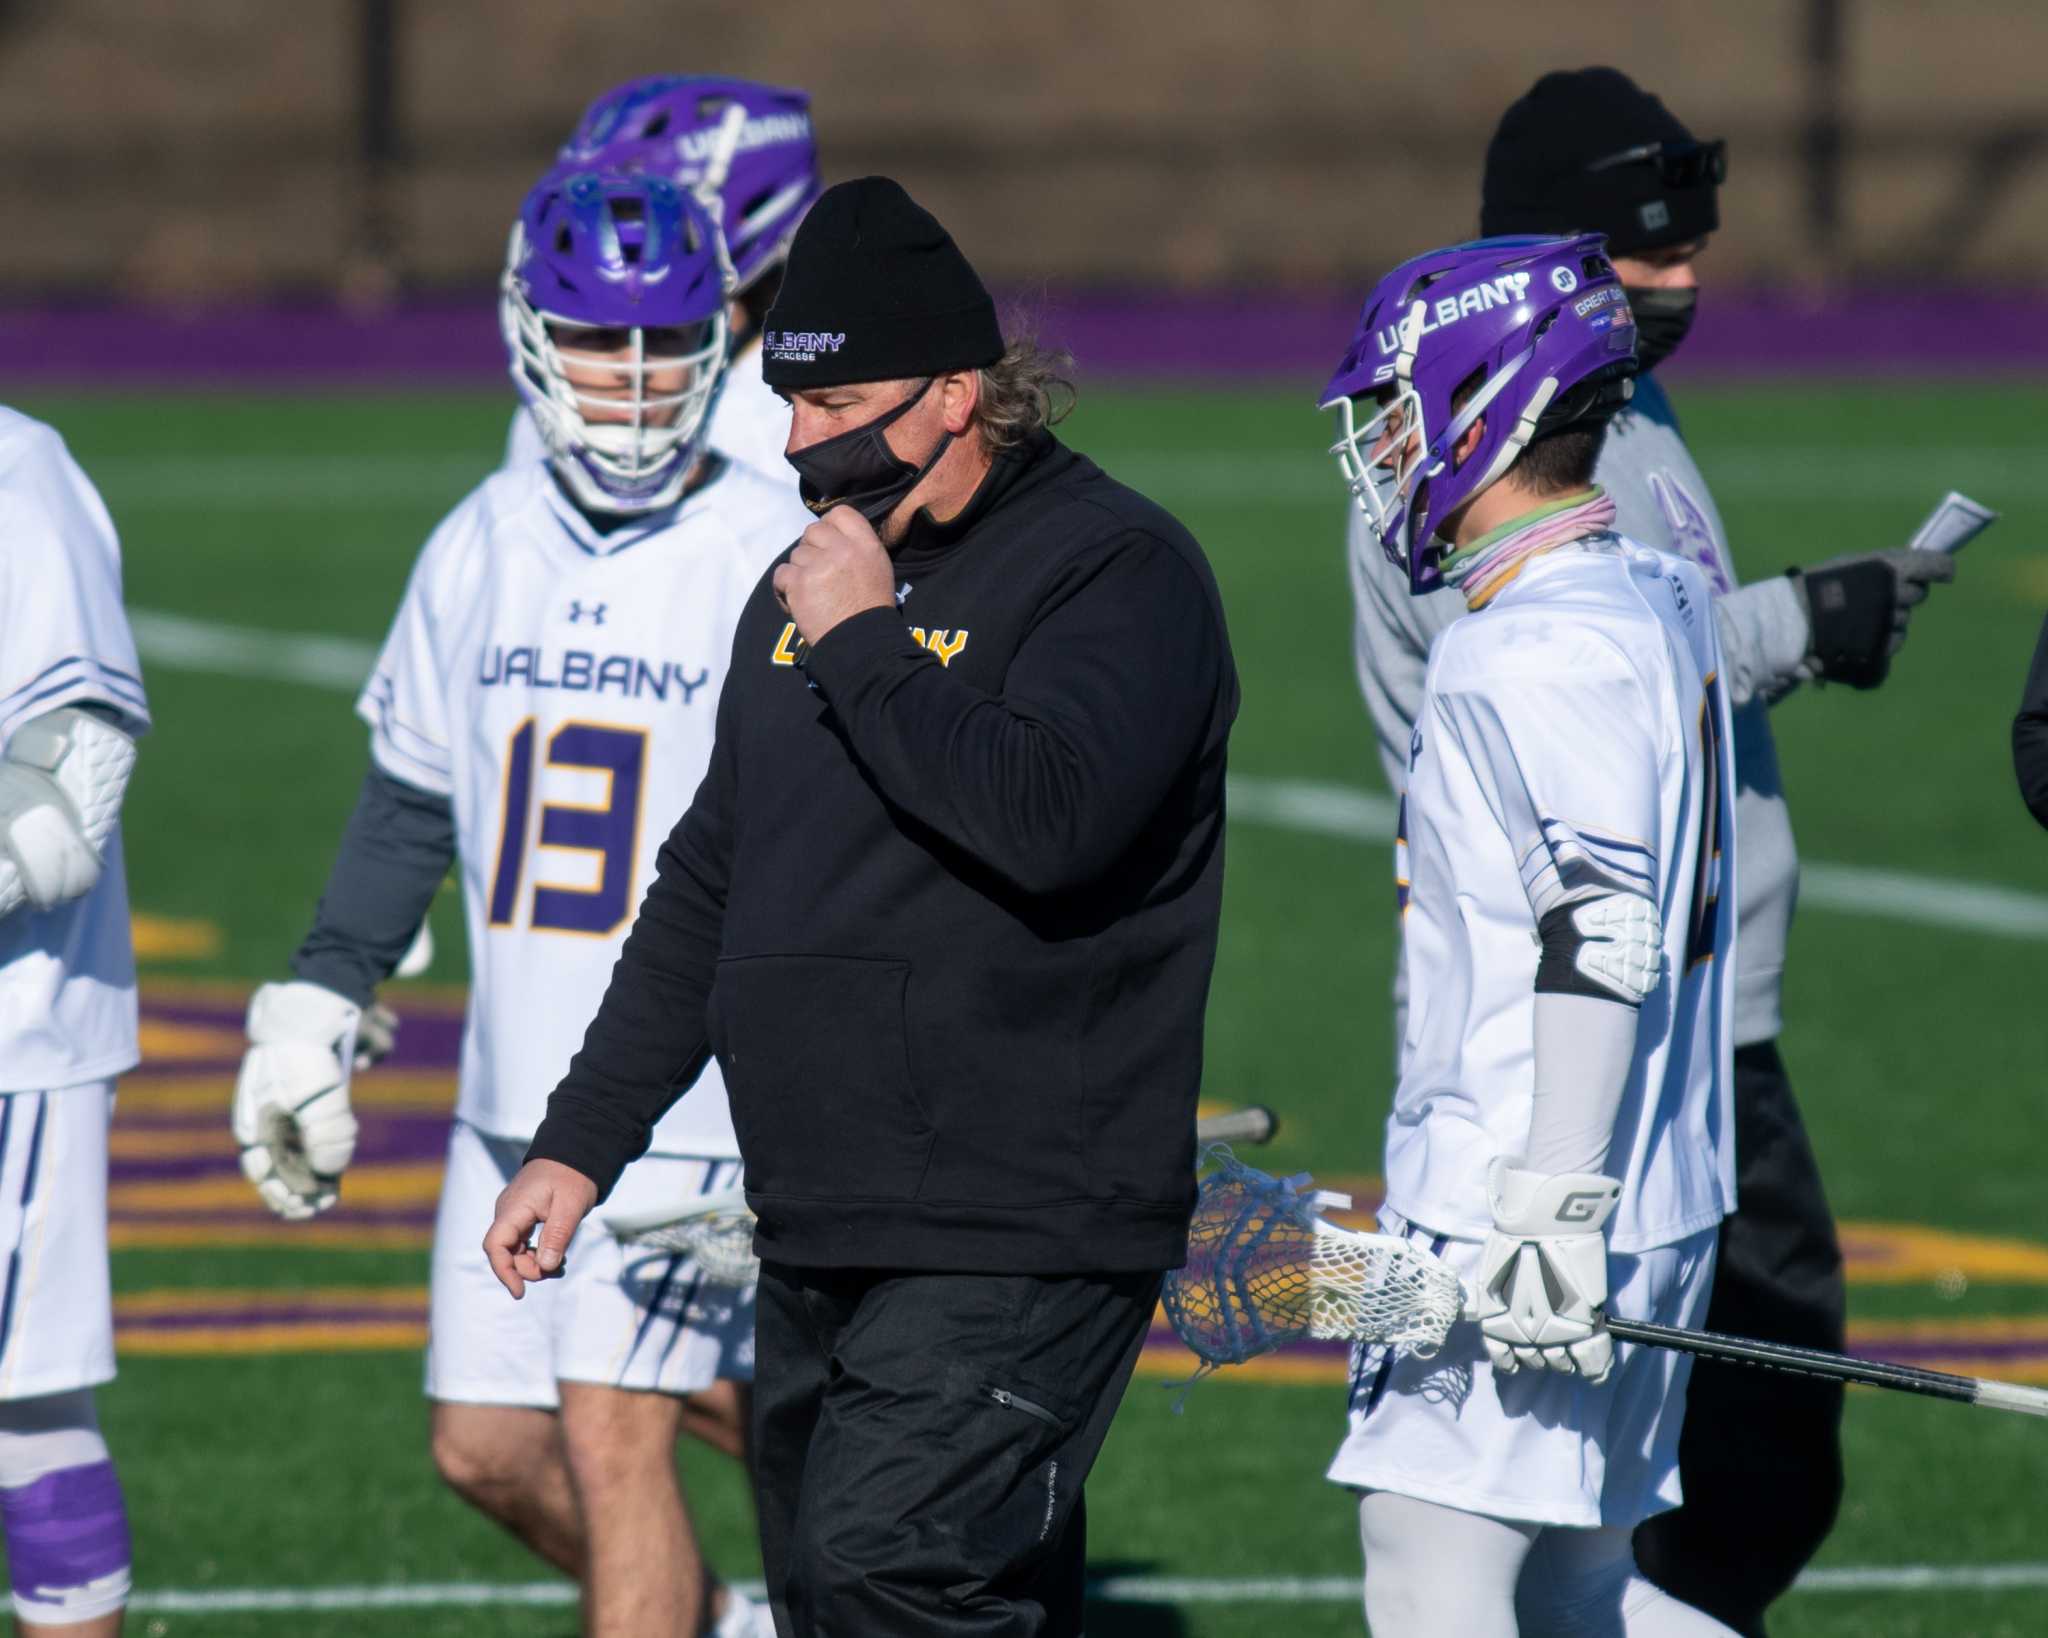 UAlbany lacrosse coach wants to get rid of NCAA transfer portal